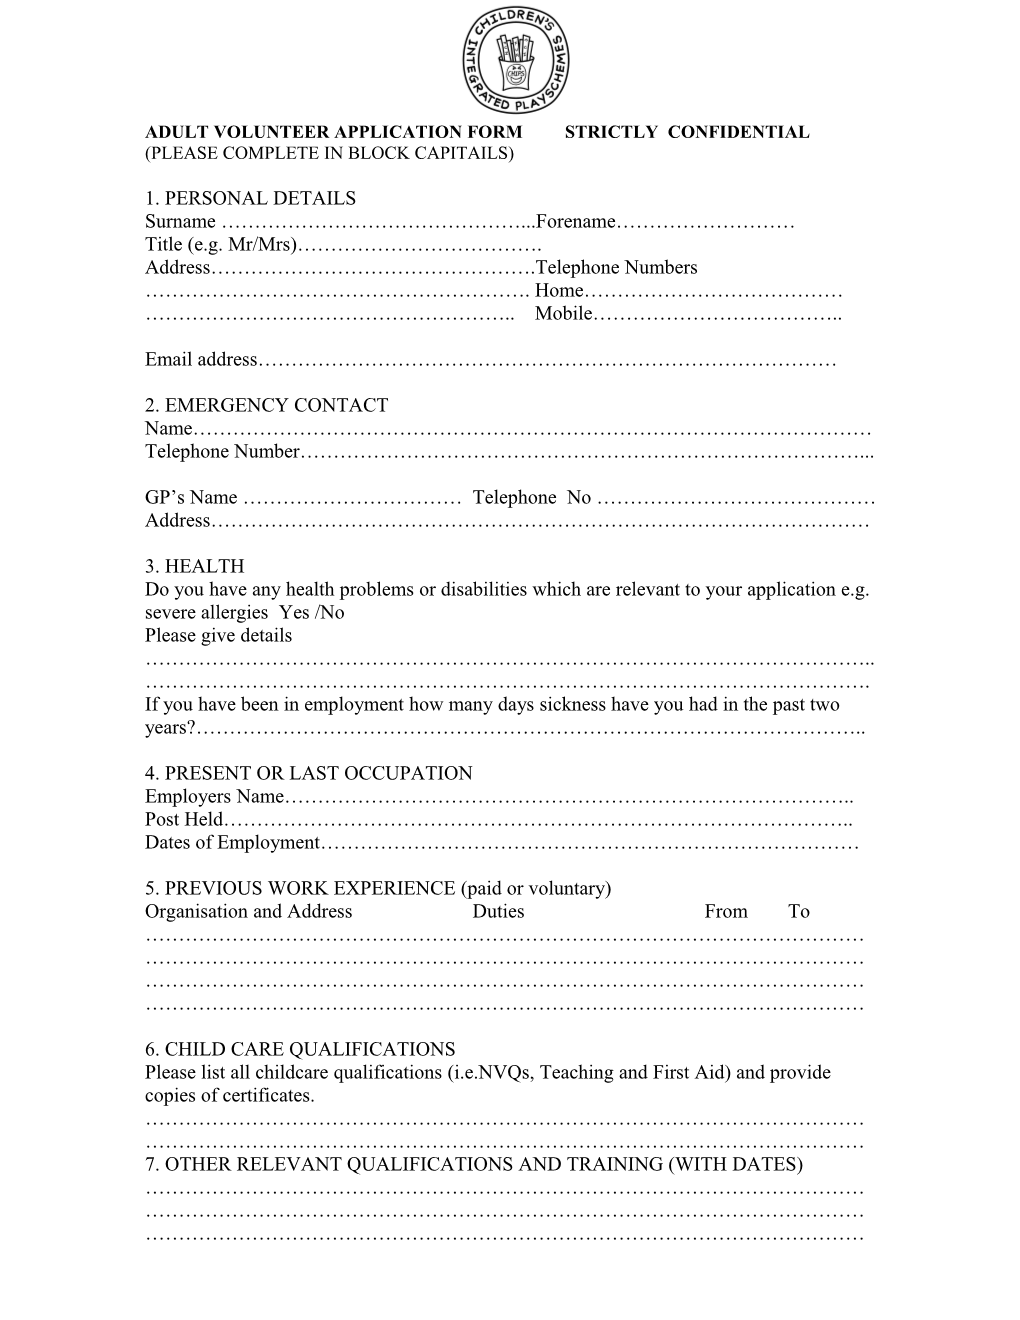 Adult Volunteer Application Form Strictly Confidential